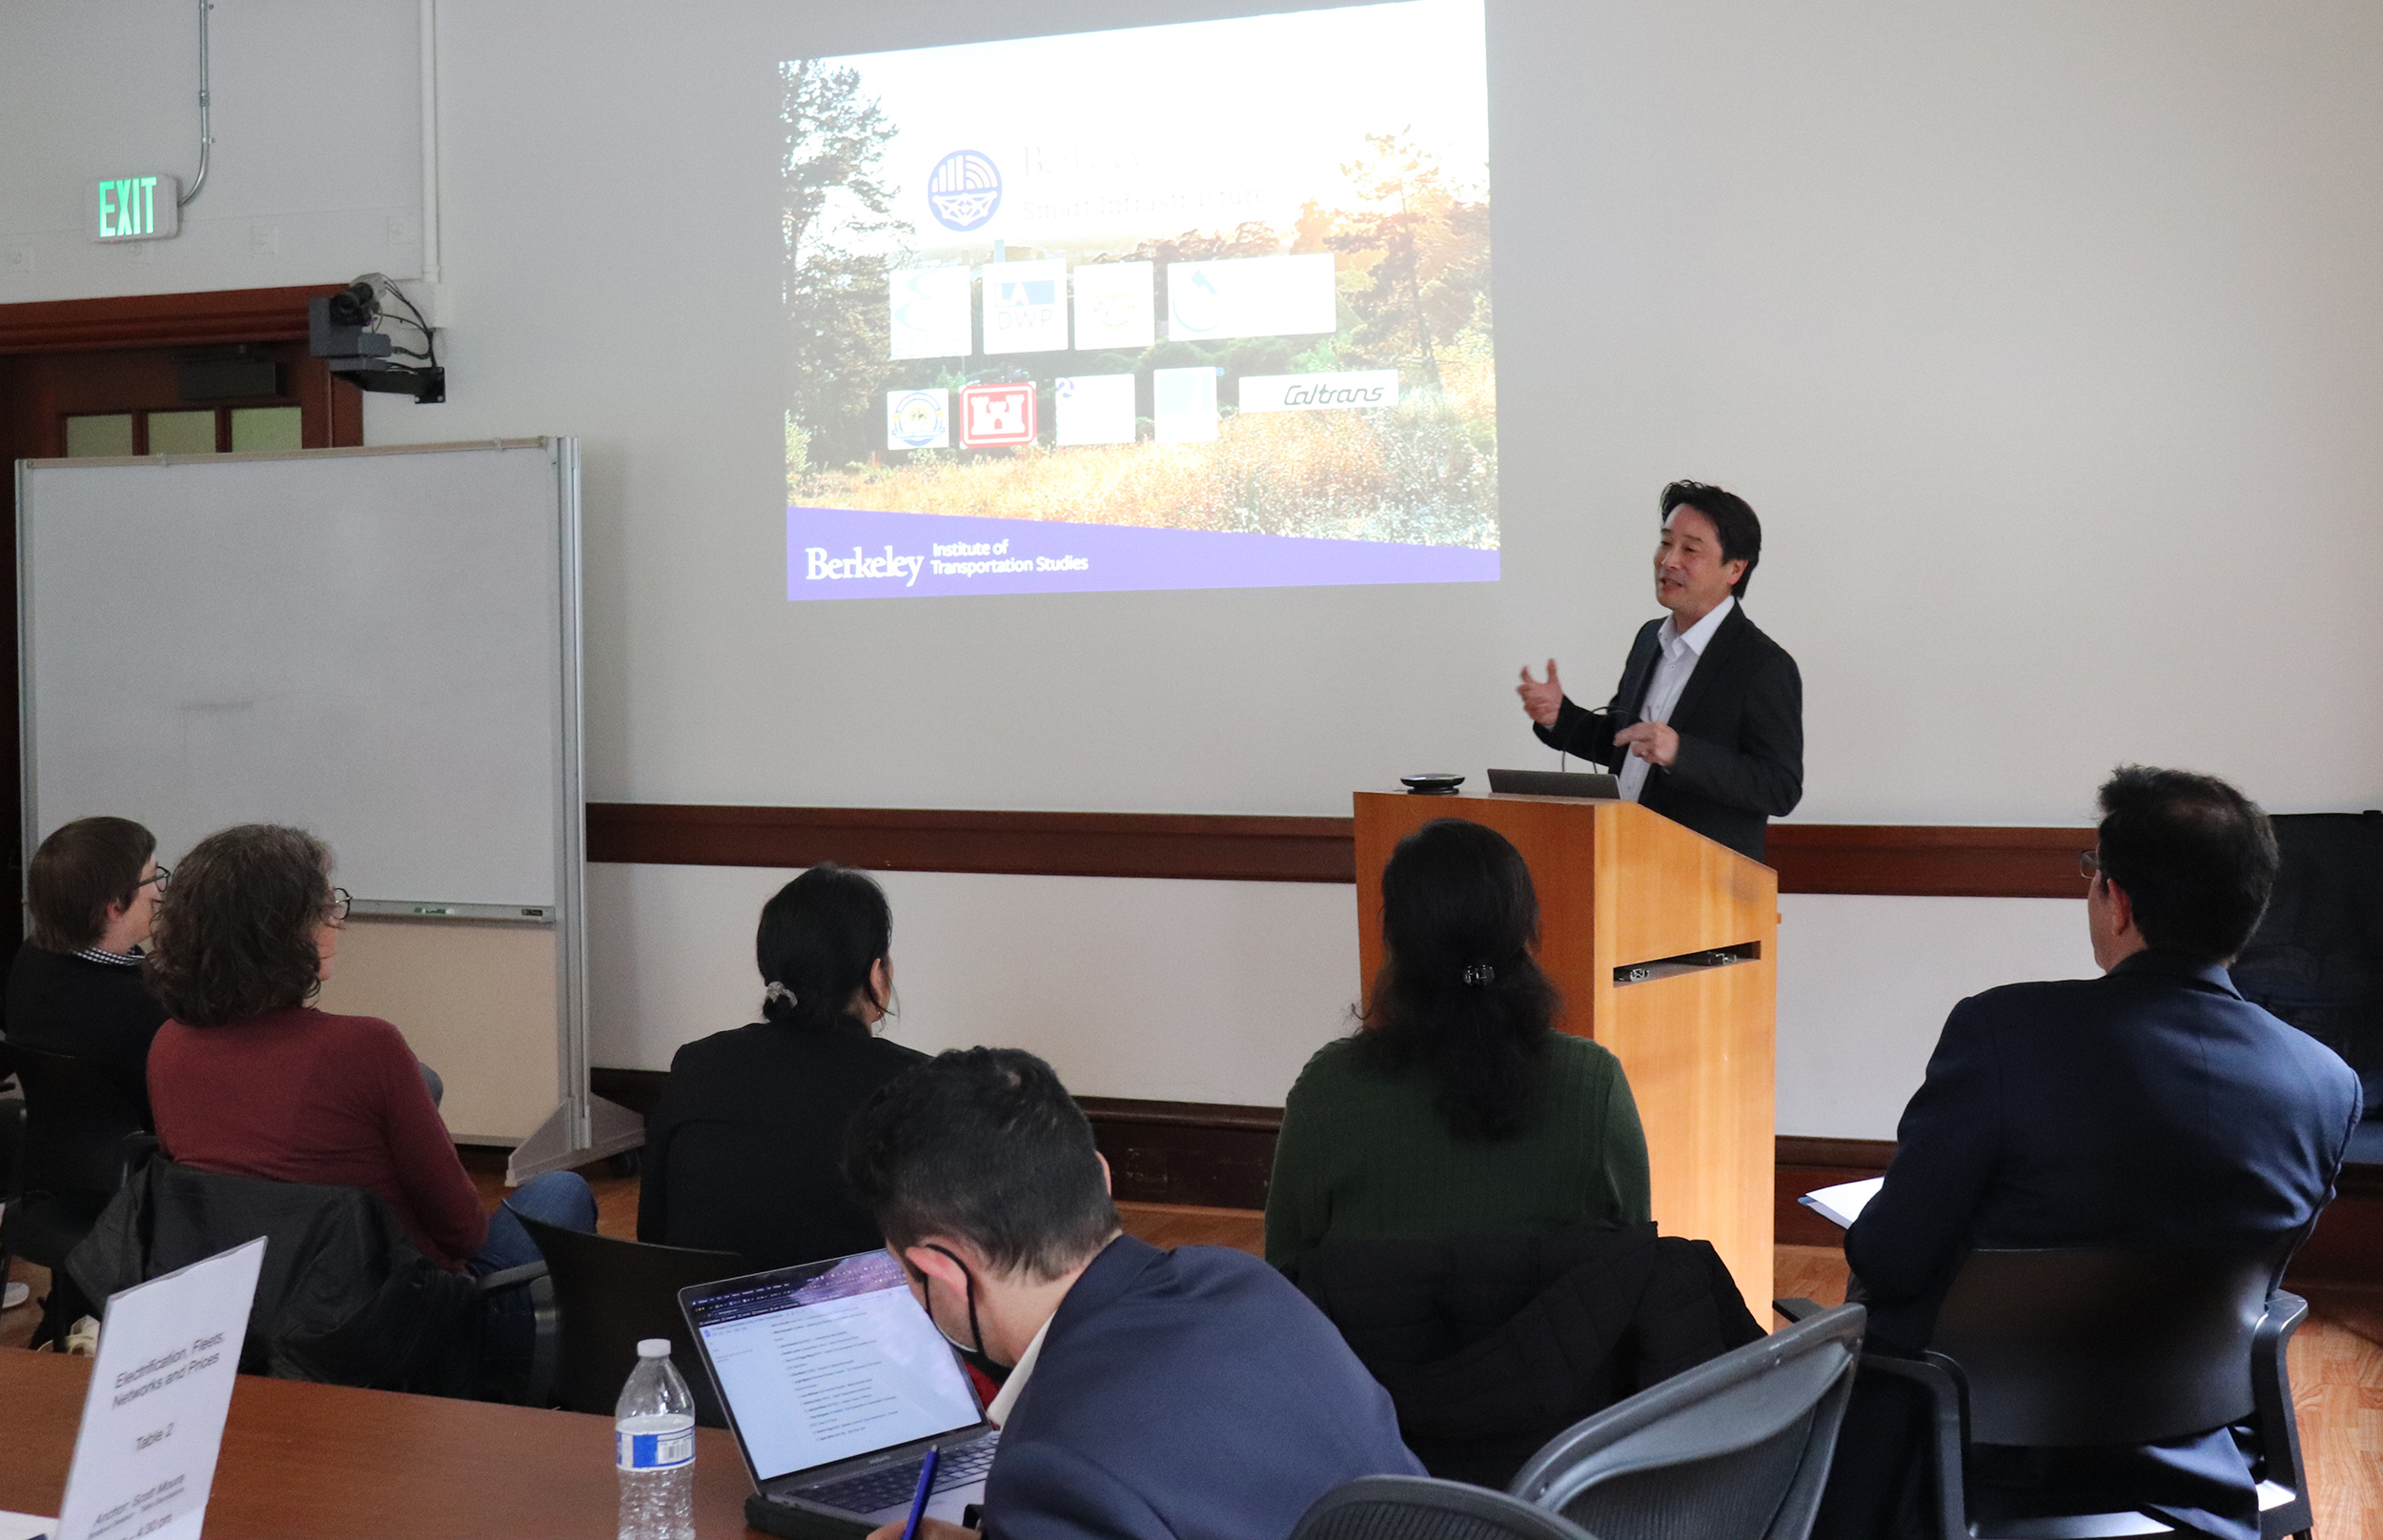 Kenichi Soga (Center for Resilient and Smart Infrastructure): Berkeley Center for Smart Infrastructure – Overview